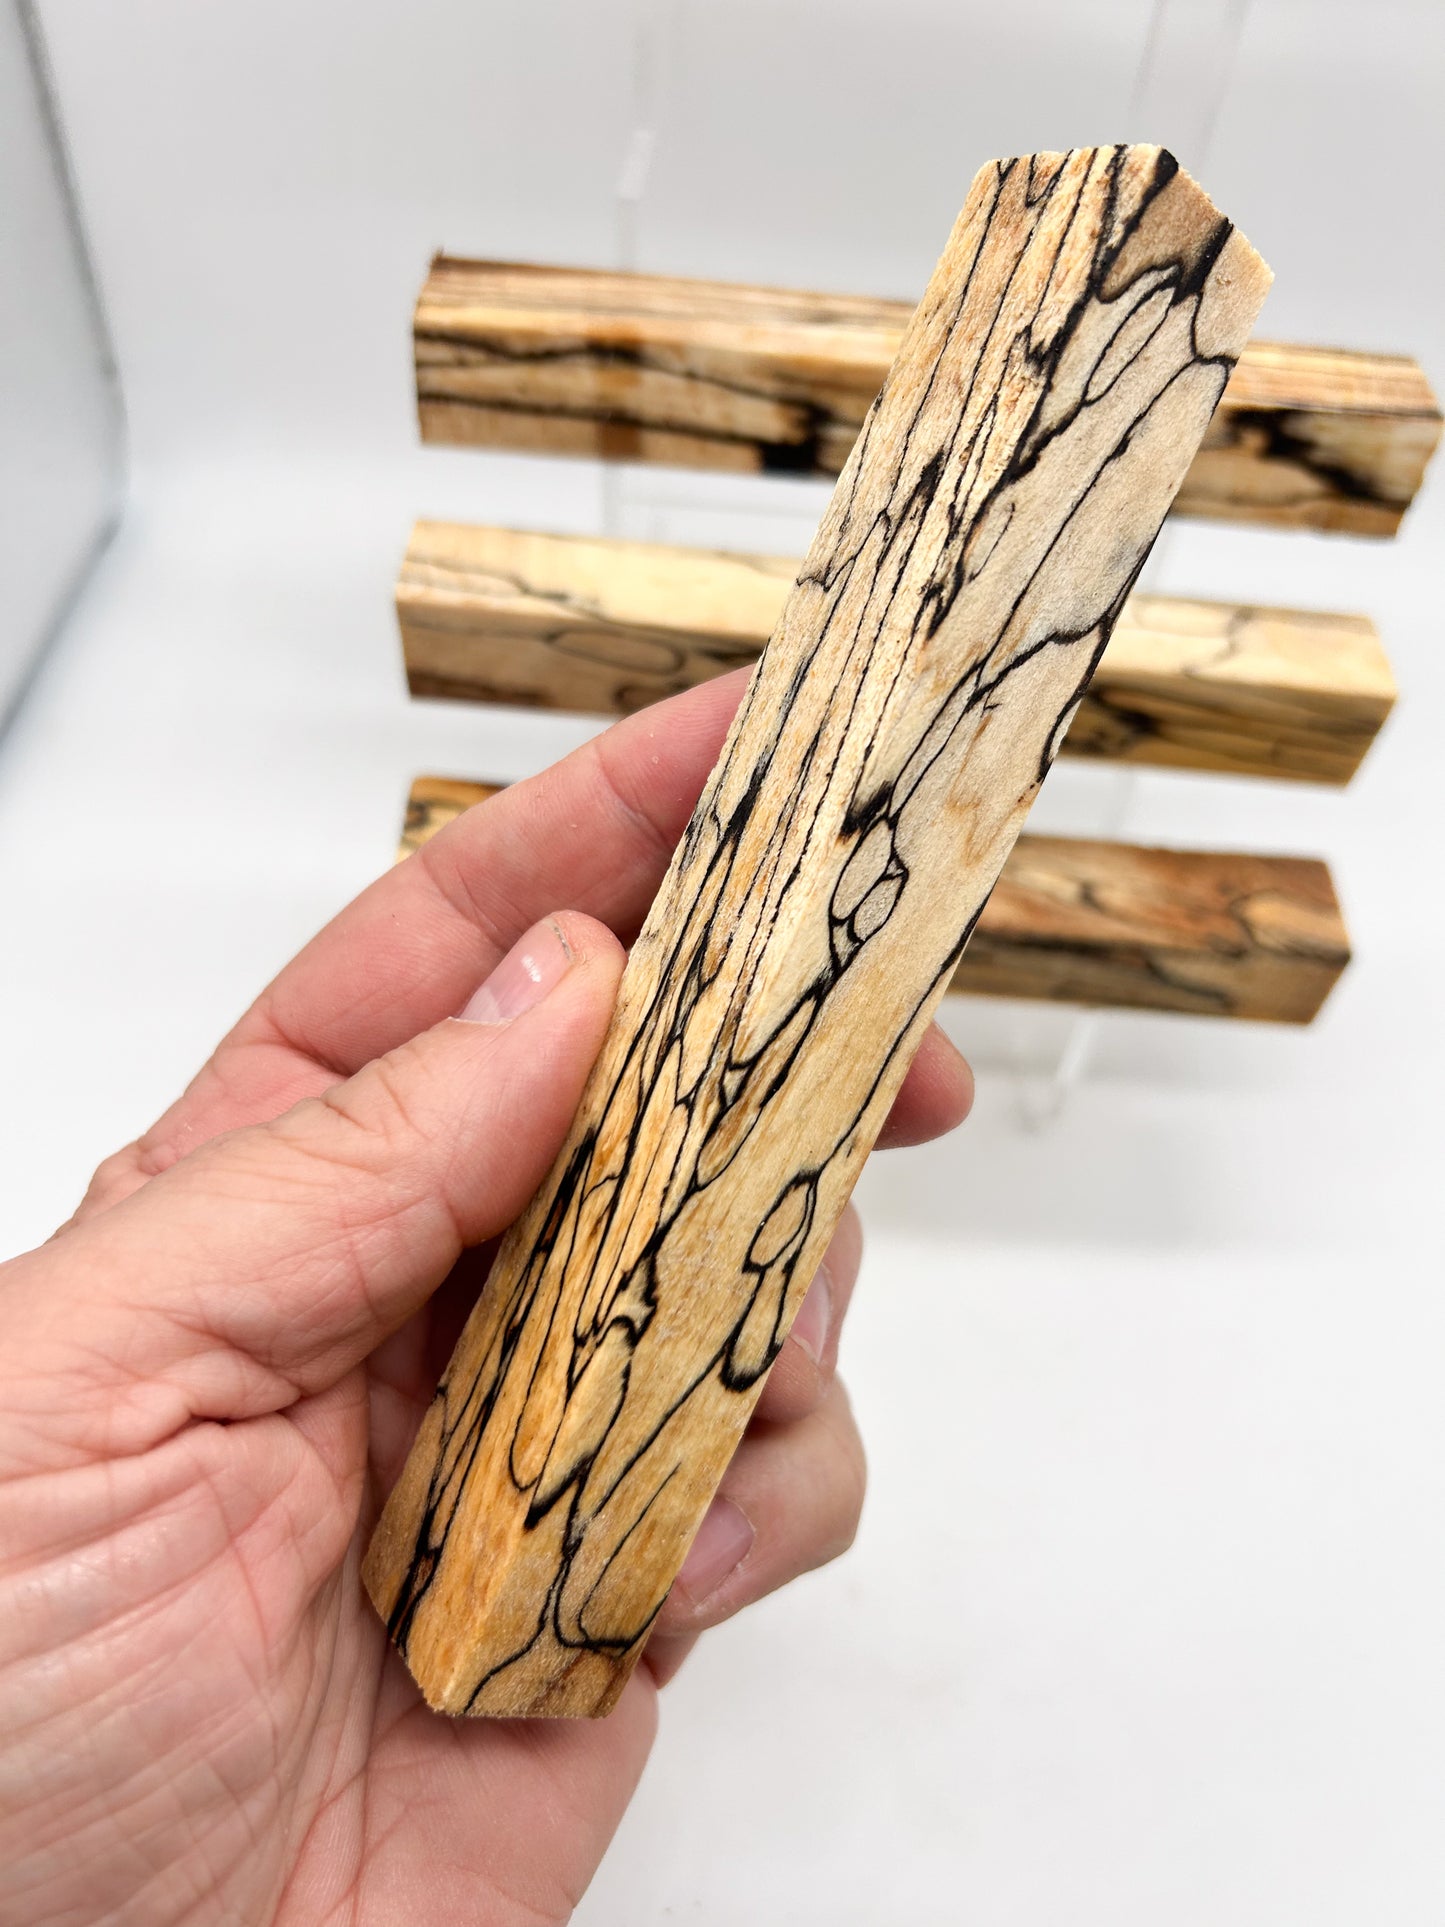 Spalted Beech Wood | Wooden Pen Blanks | Fully Stabilised